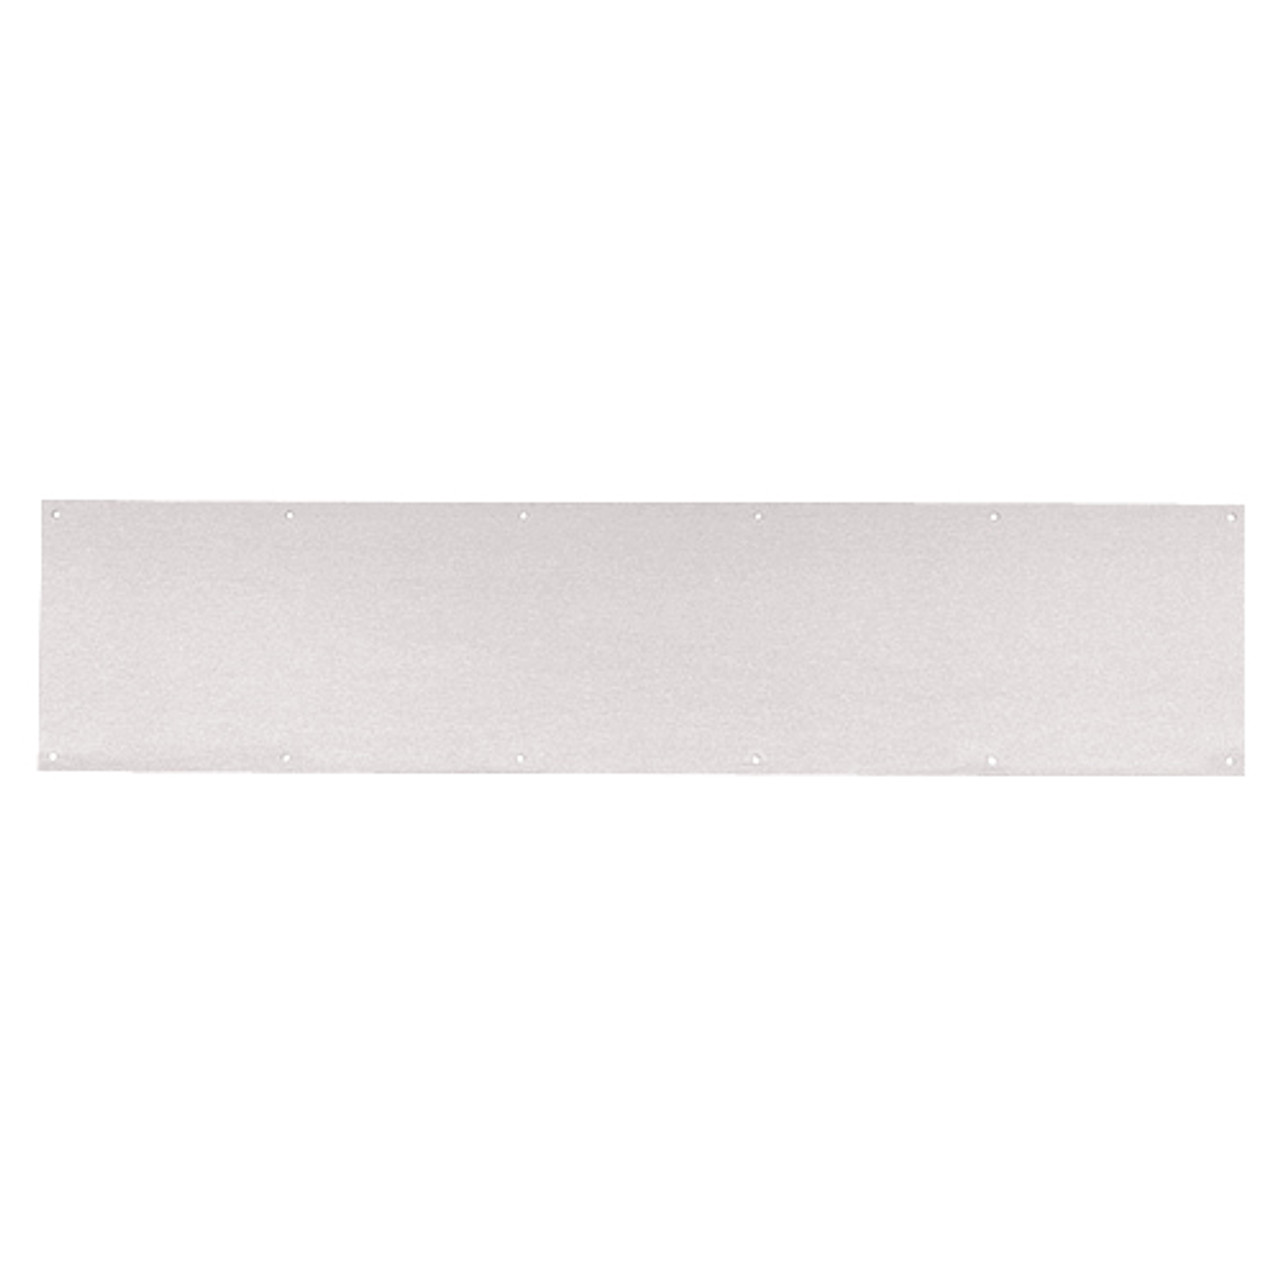 8400-US32-12x46-B-CS Ives 8400 Series Protection Plate in Bright Stainless Steel